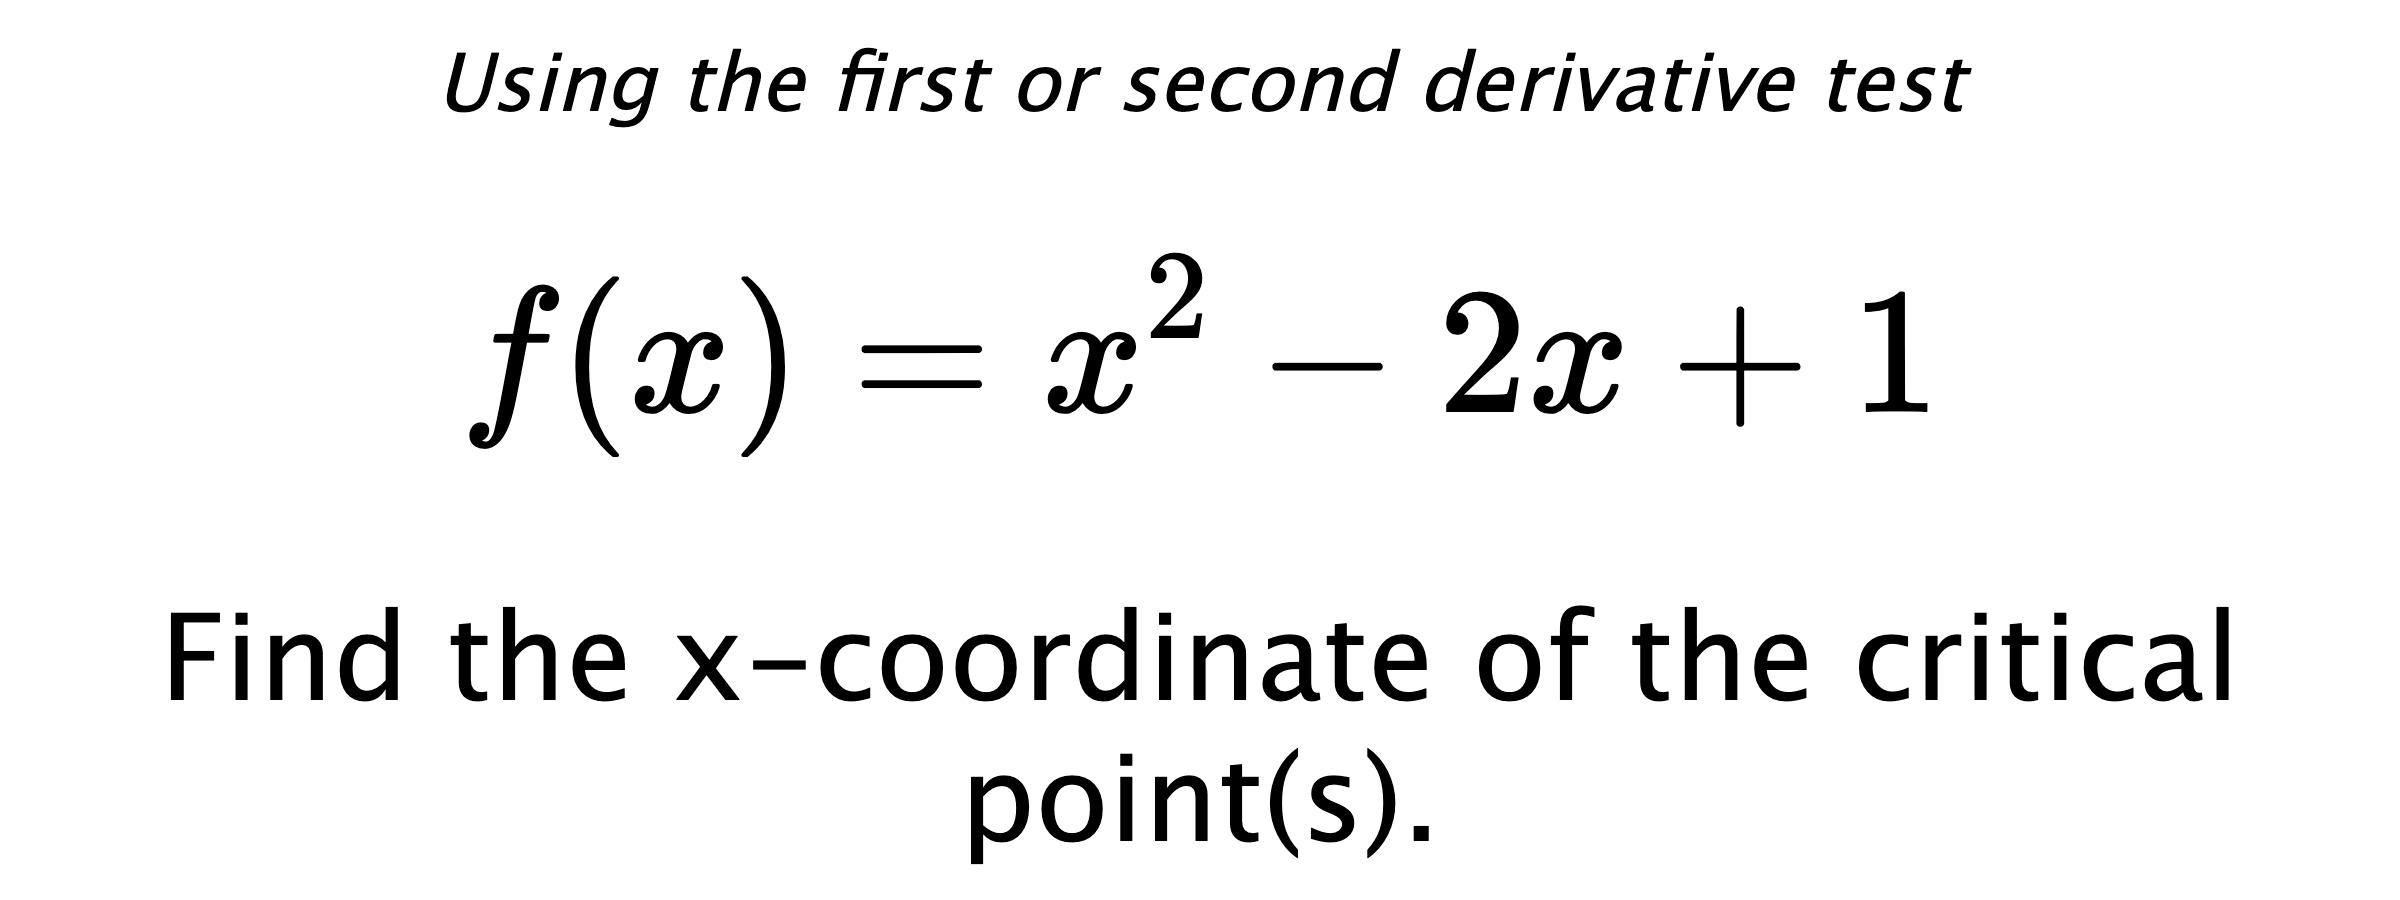 Using the first or second derivative test $$ f(x)=x^2-2x+1 $$ Find the x-coordinate of the critical point(s).